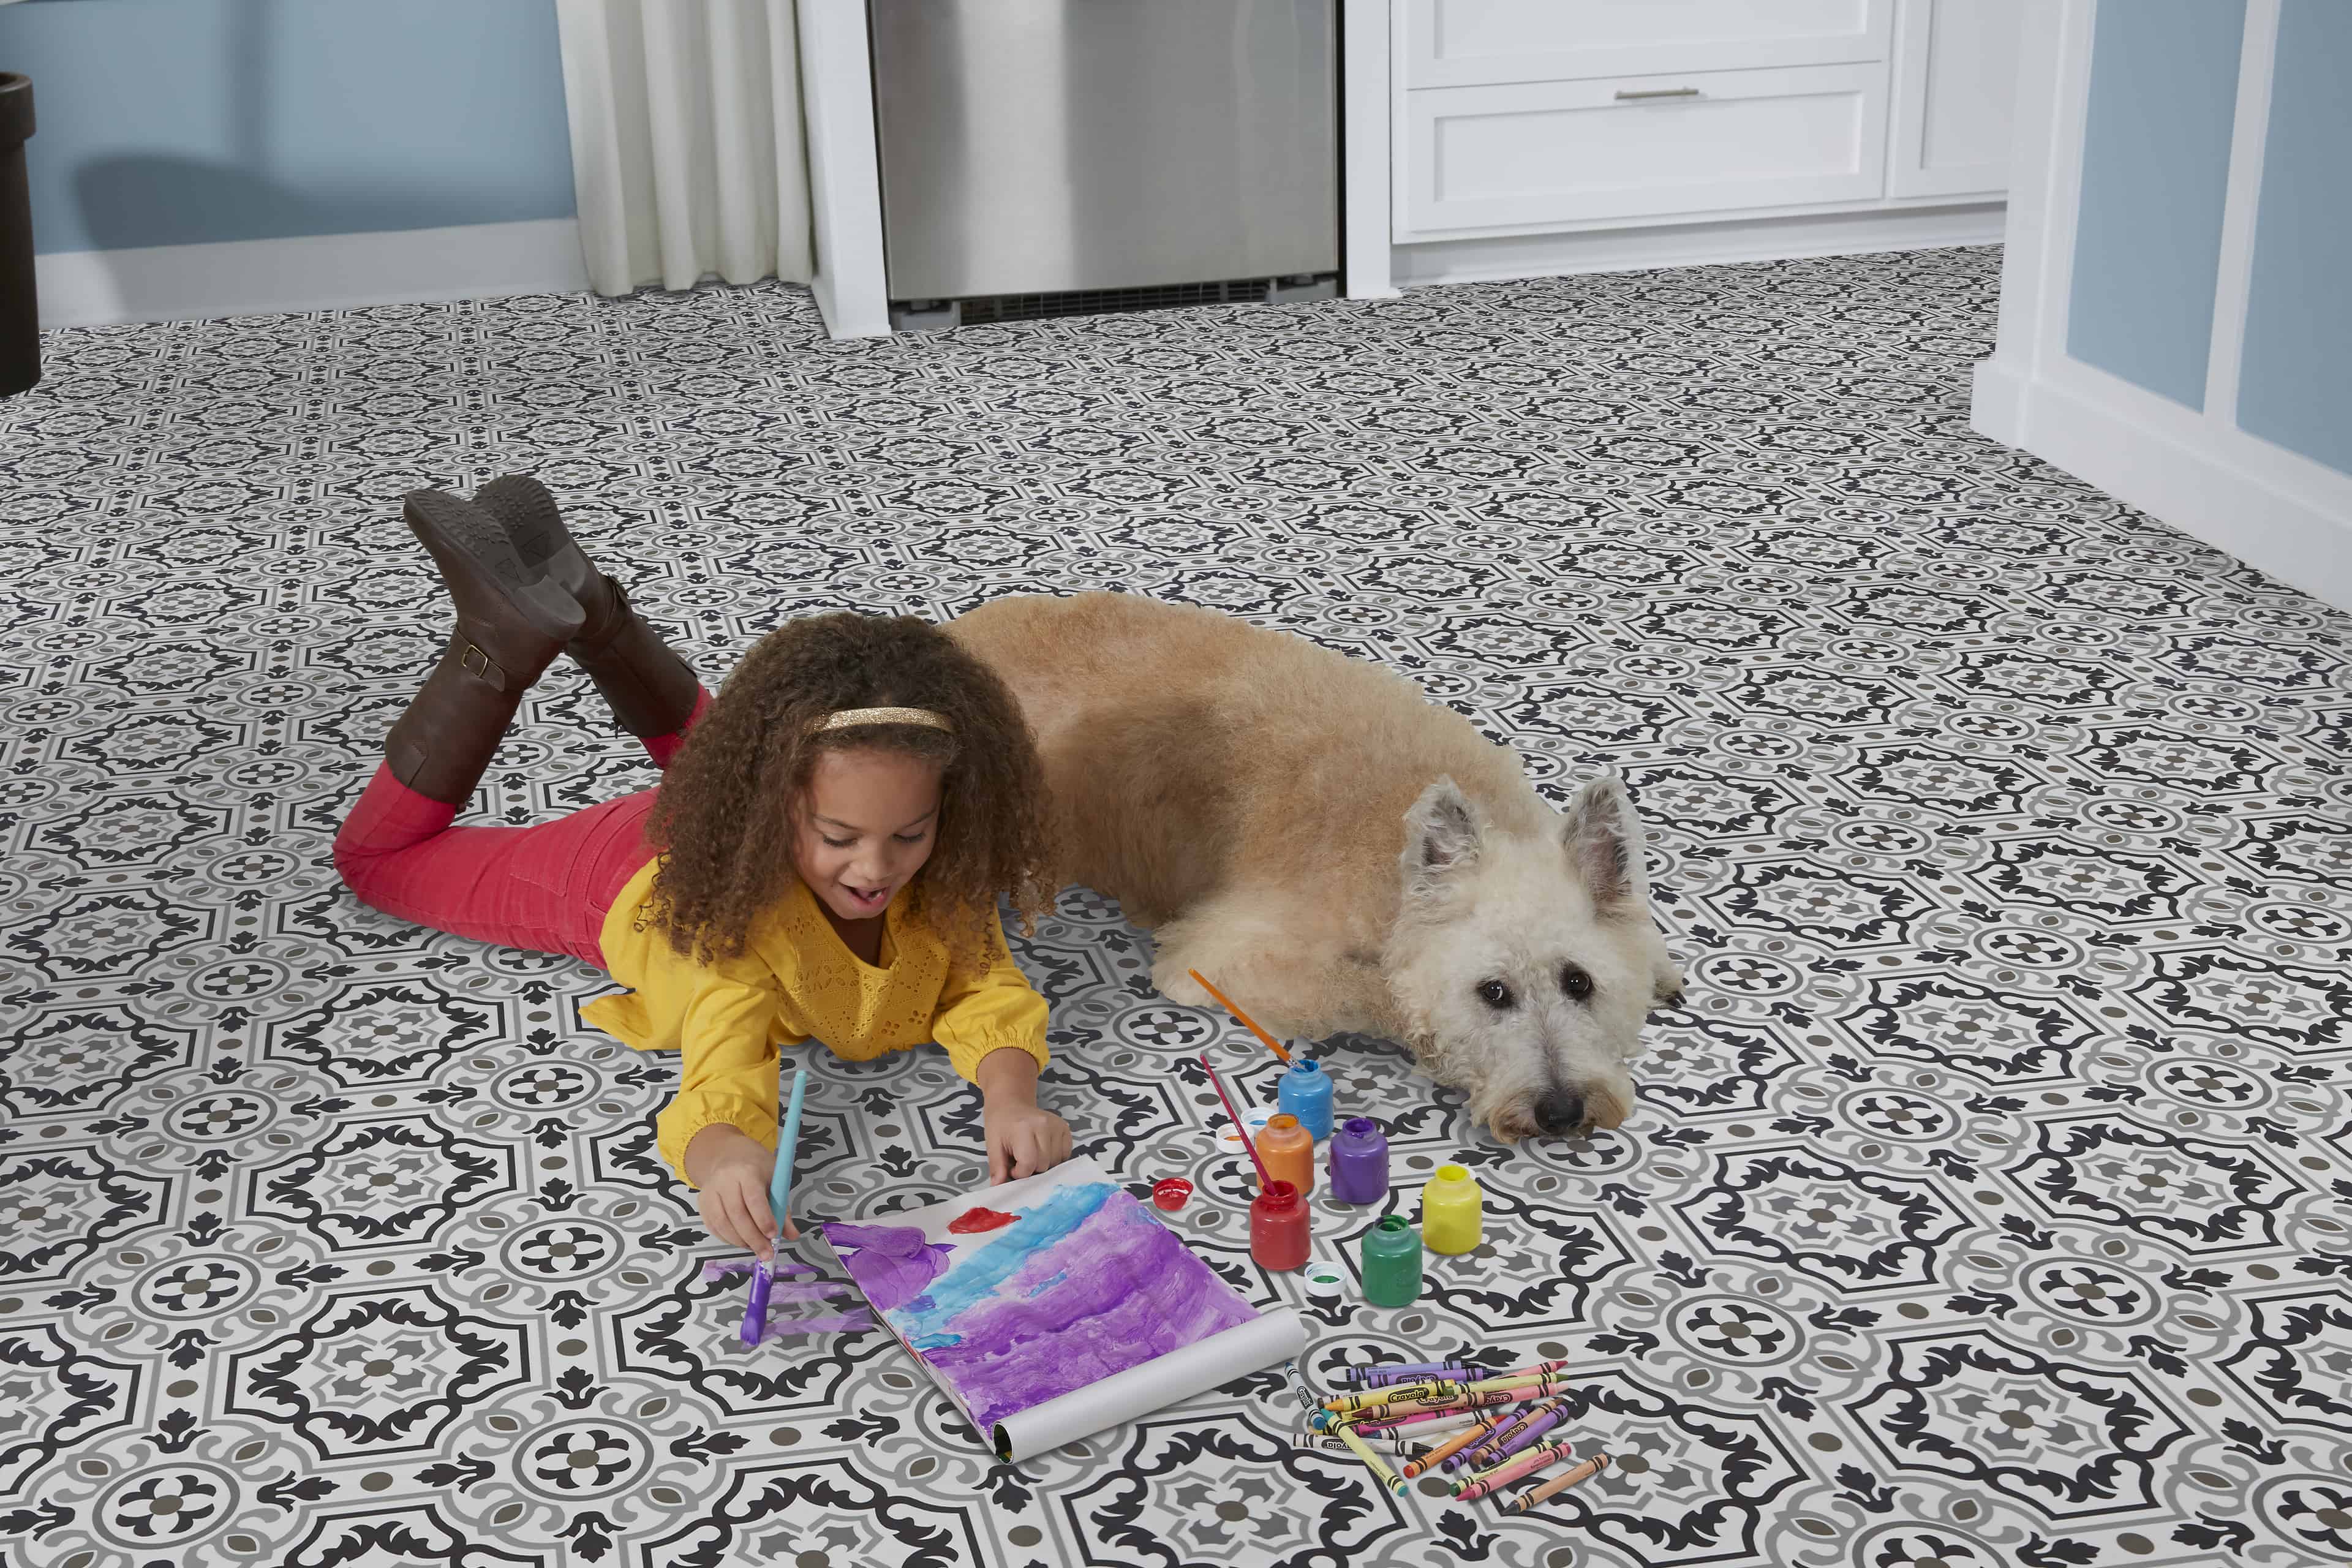 Child laying on floor paining a picture with dog laying beside her; relating to flooring for a busy home.